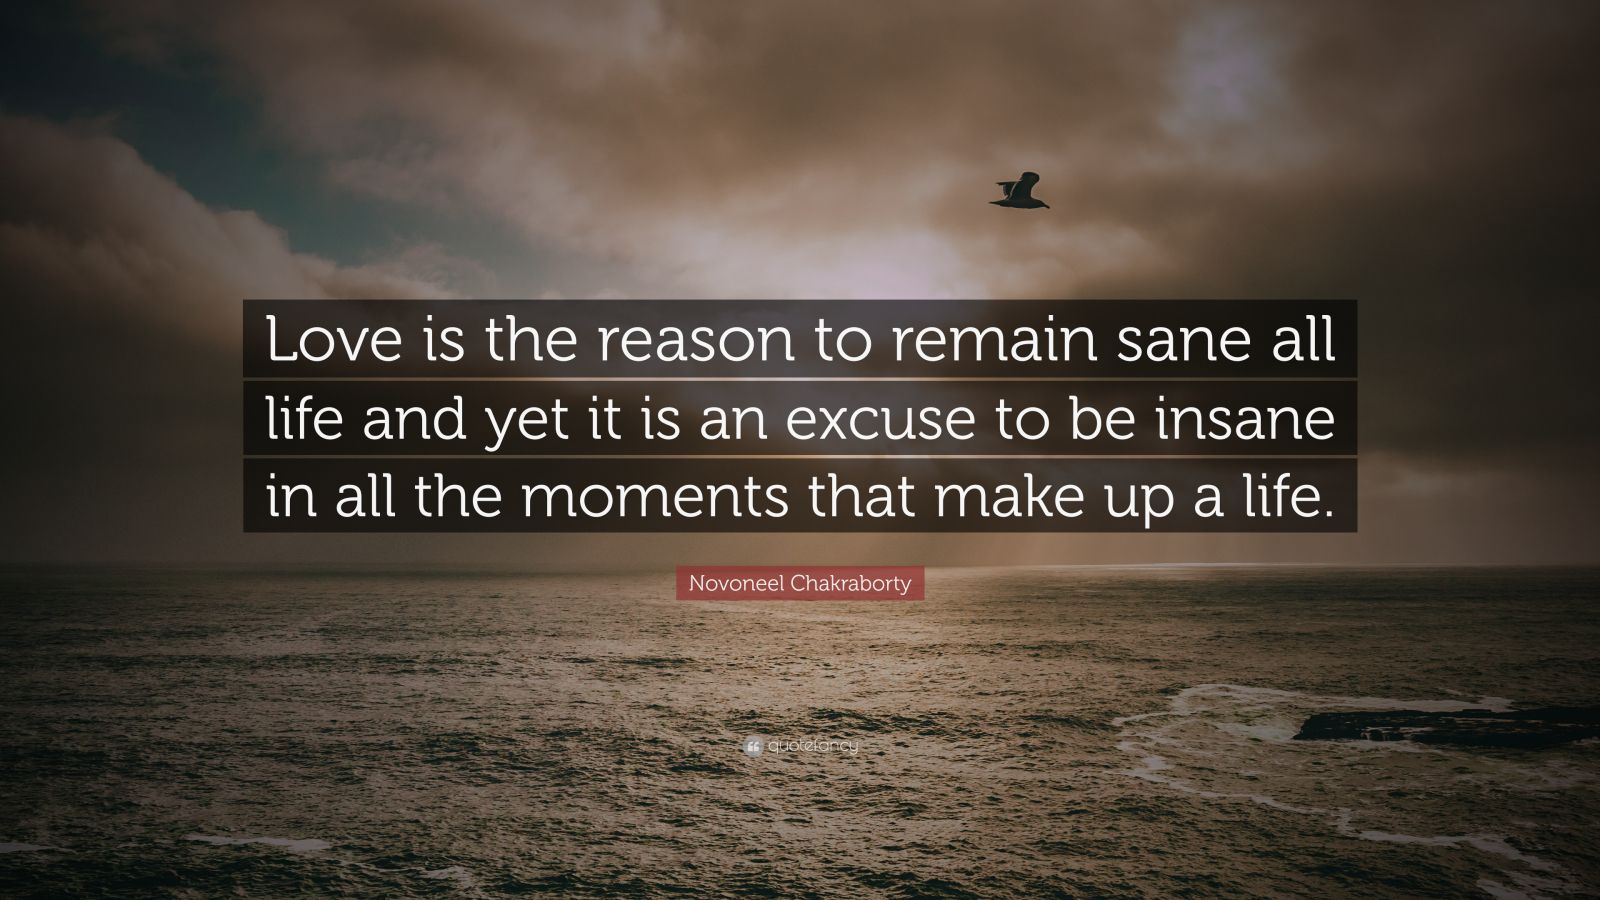 Novoneel Chakraborty Quote: "Love is the reason to remain sane all life and yet it is an excuse ...